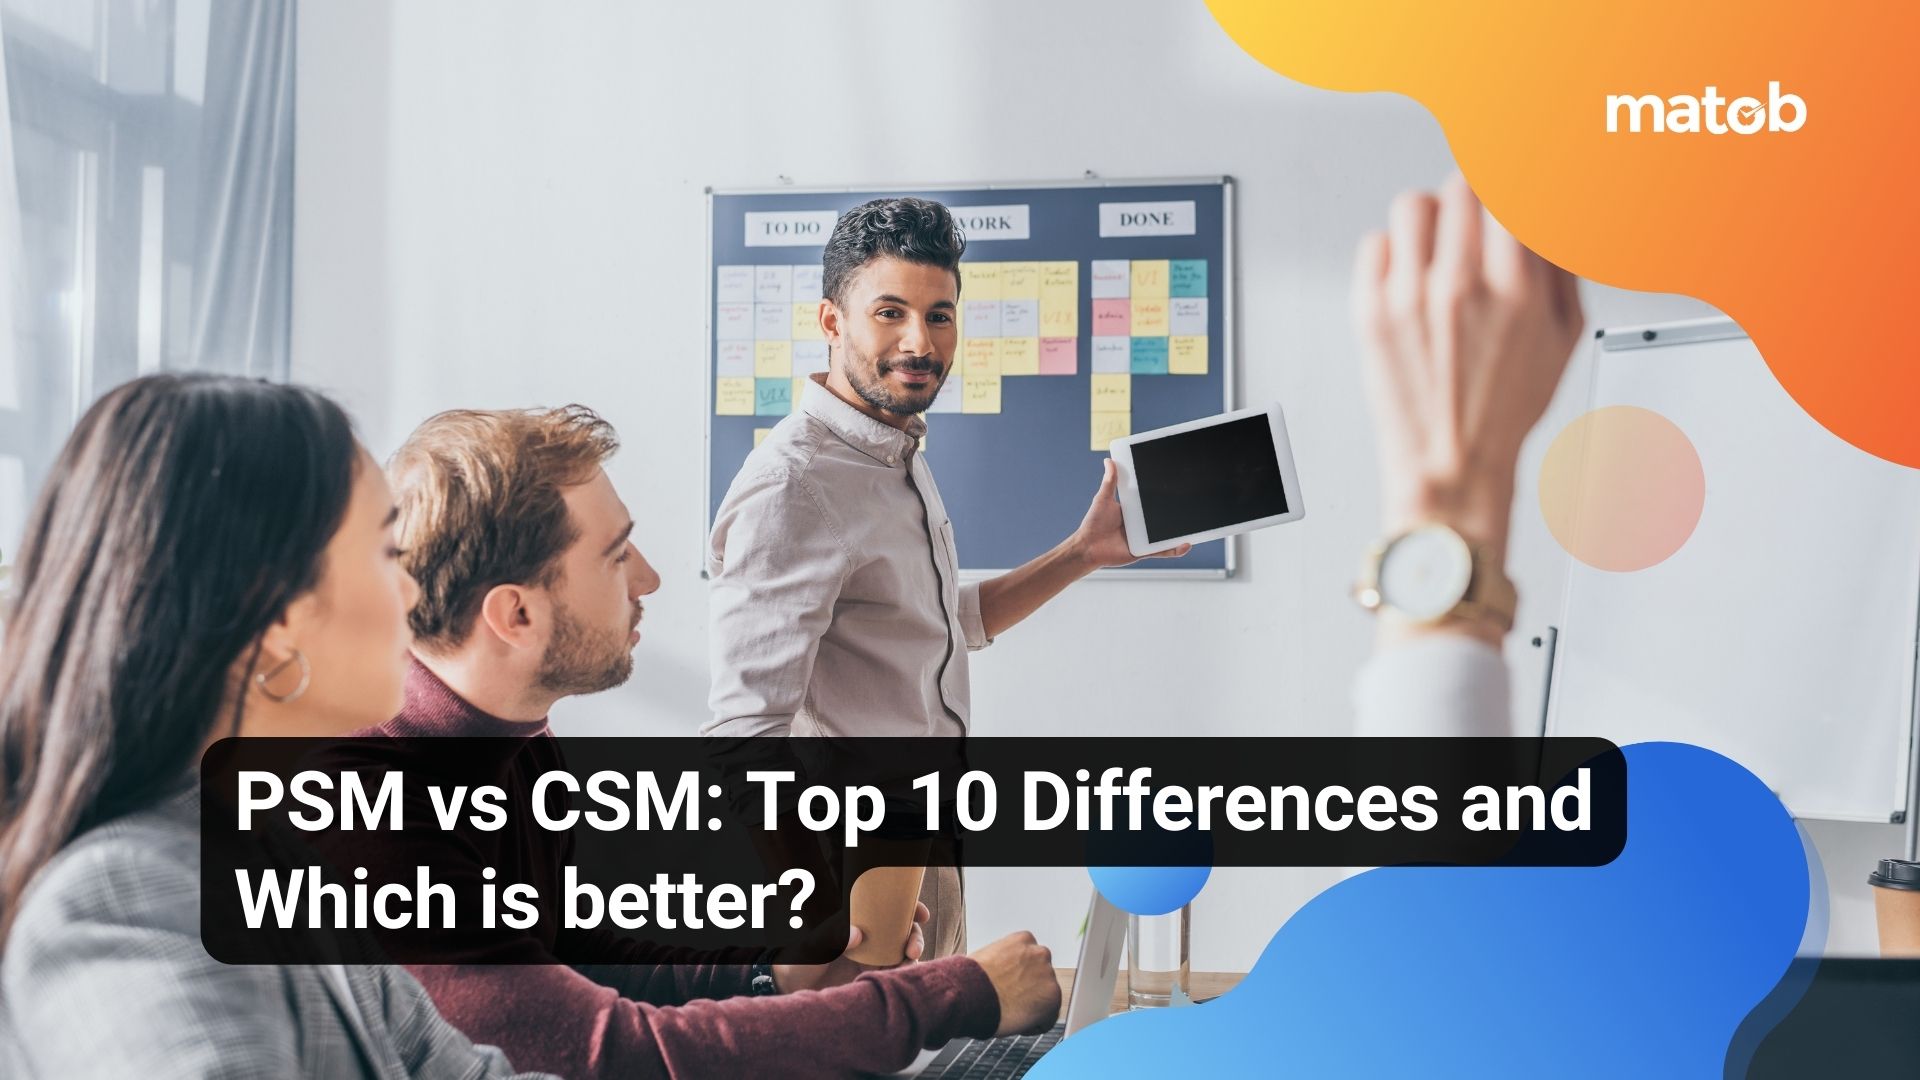 PSM vs CSM: Top 10 Differences and Which is better?